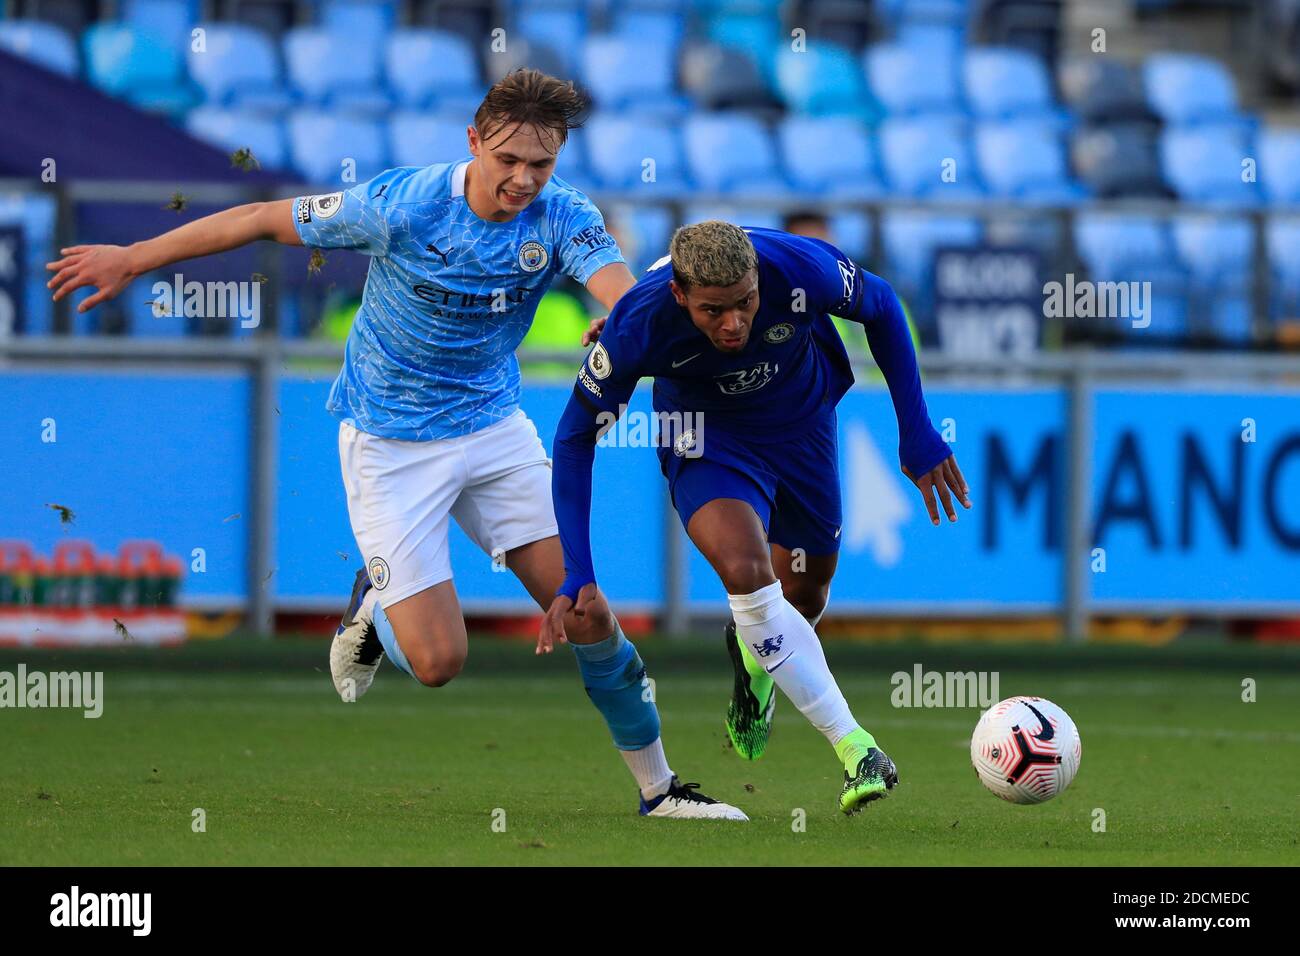 Manchester, UK. 22nd Nov, 2020. Faustino Anjorin #10 of Chelsea tries to run from Callum Doyle #5 of Manchester City Credit: News Images /Alamy Live News Stock Photo